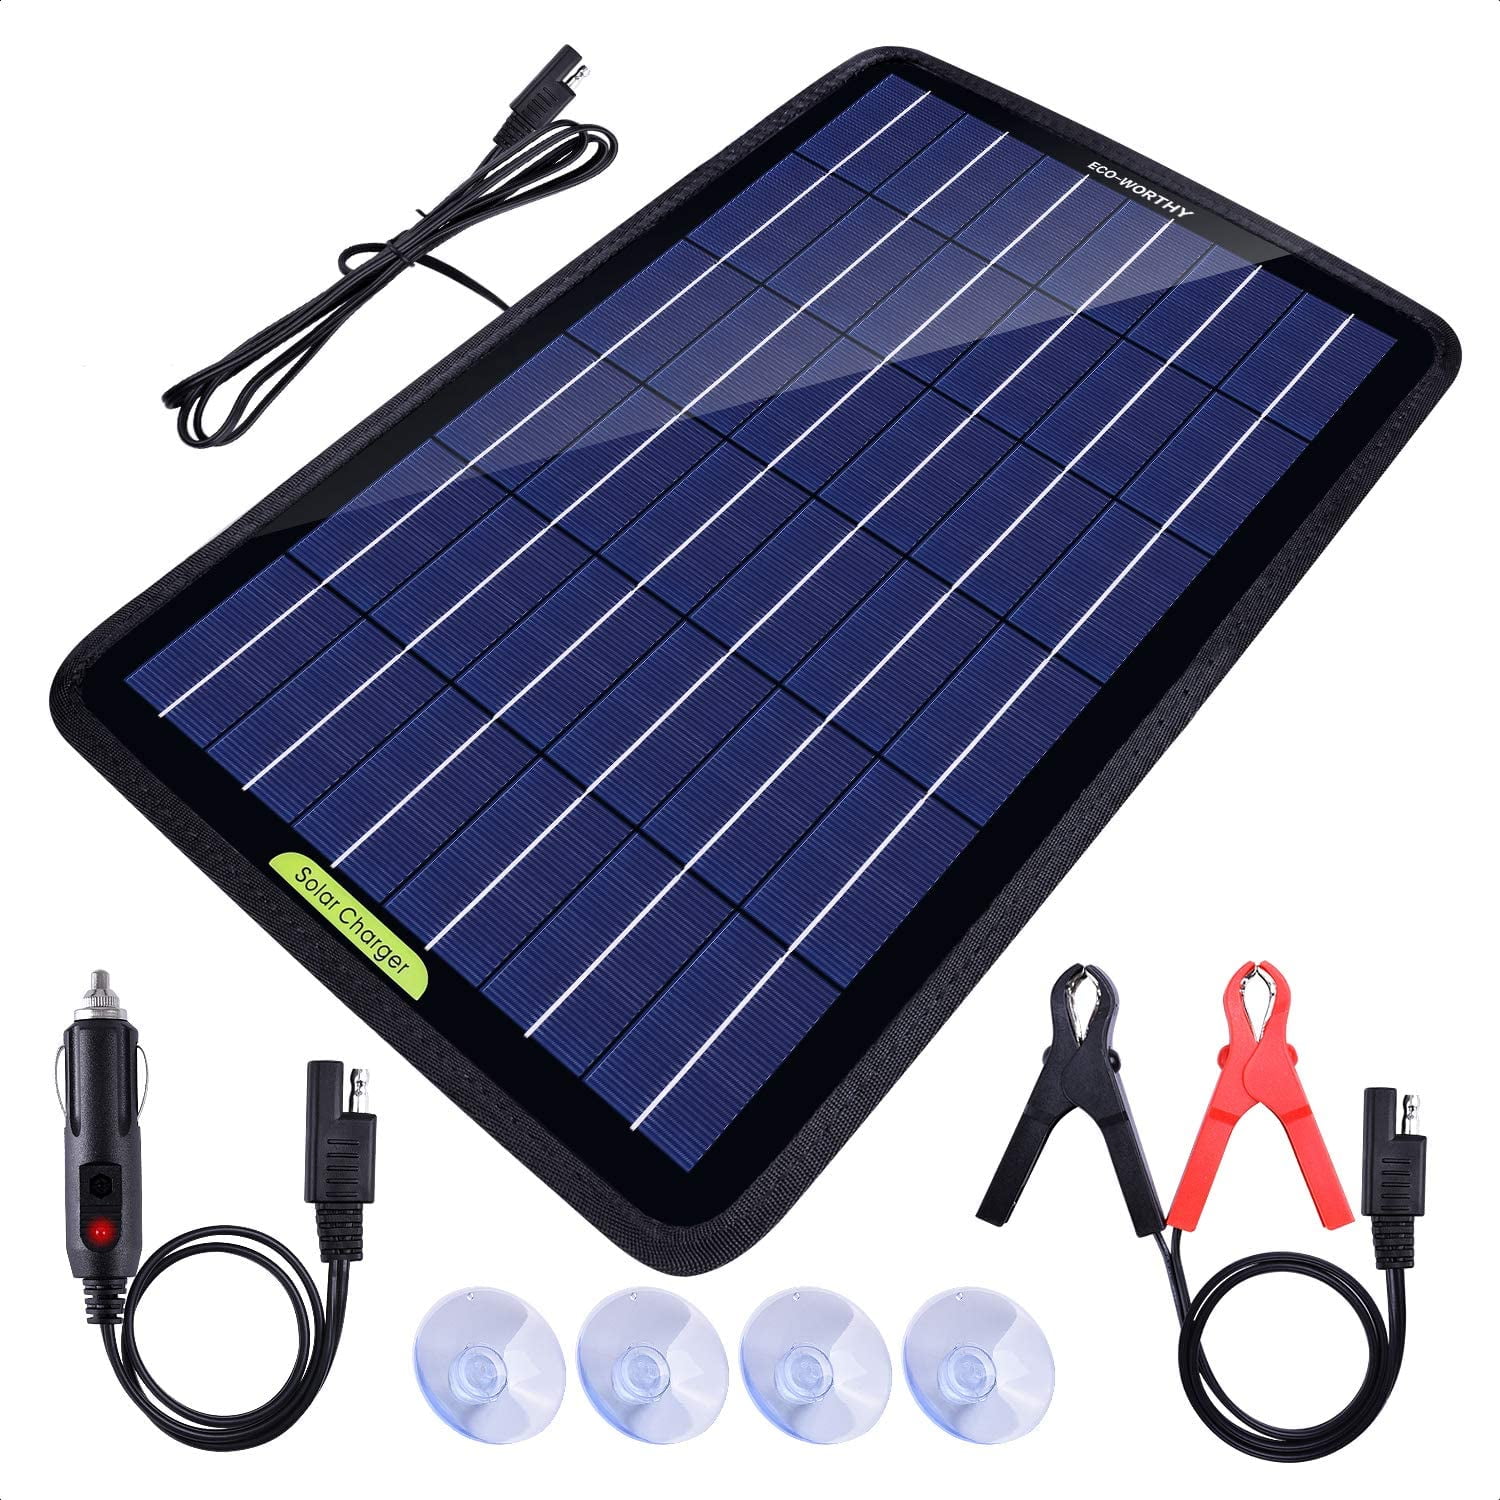 Snowmobile etc Trailer Marine Motorcycle RV SUNER POWER 12V Solar Car Battery Charger & Maintainer Boat Powersports Portable 12W Solar Panel Trickle Charging Kit for Automotive 